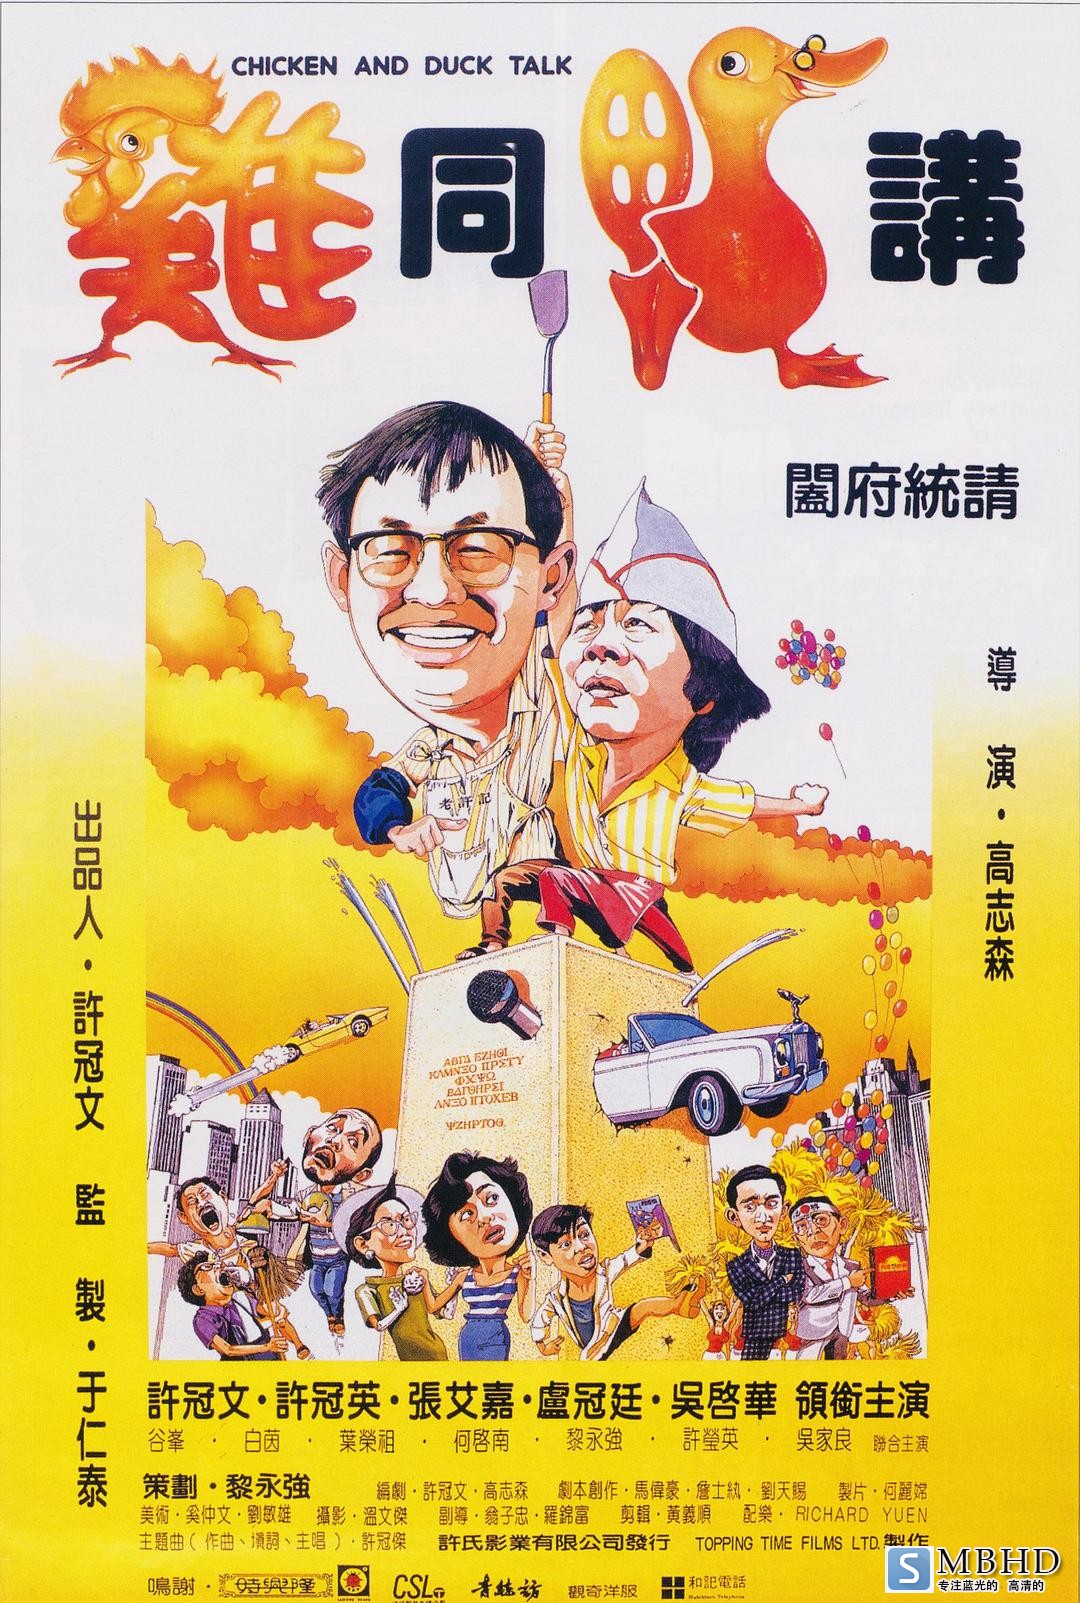 uͬv Chicken.And.Duck.Talk.1988.CHINESE.1080p.BluRay.x264.DTS-FGT 8.97GB-1.png